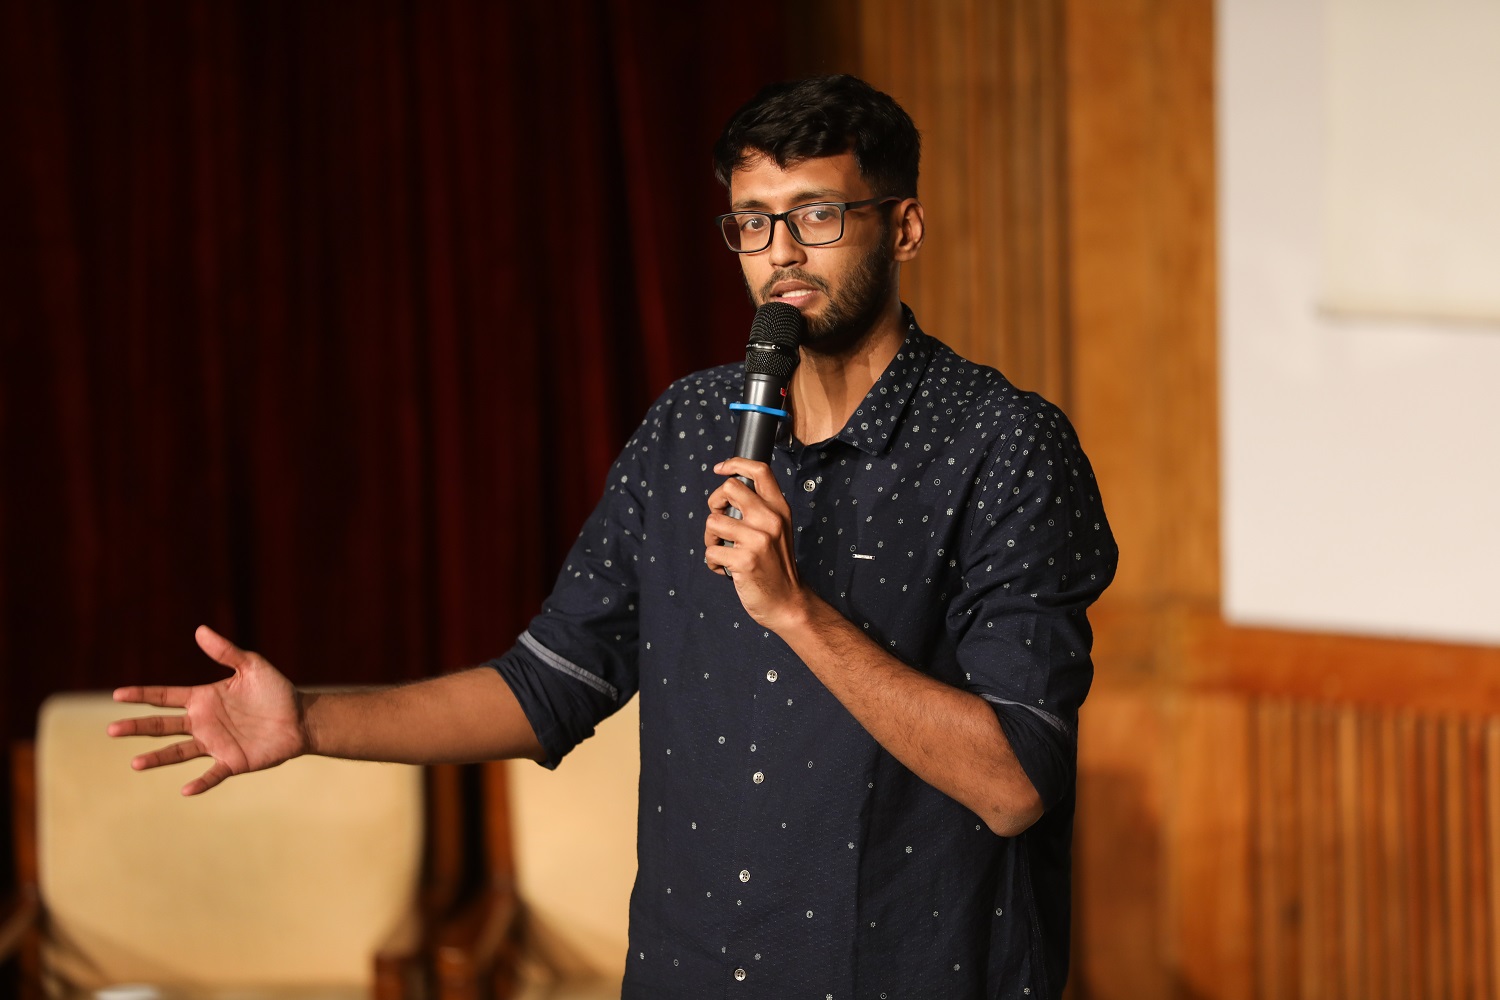 Shamik Chakrabarti, PGPEM student and finalist, Comicstaan 3, during his stand-up comedy act.